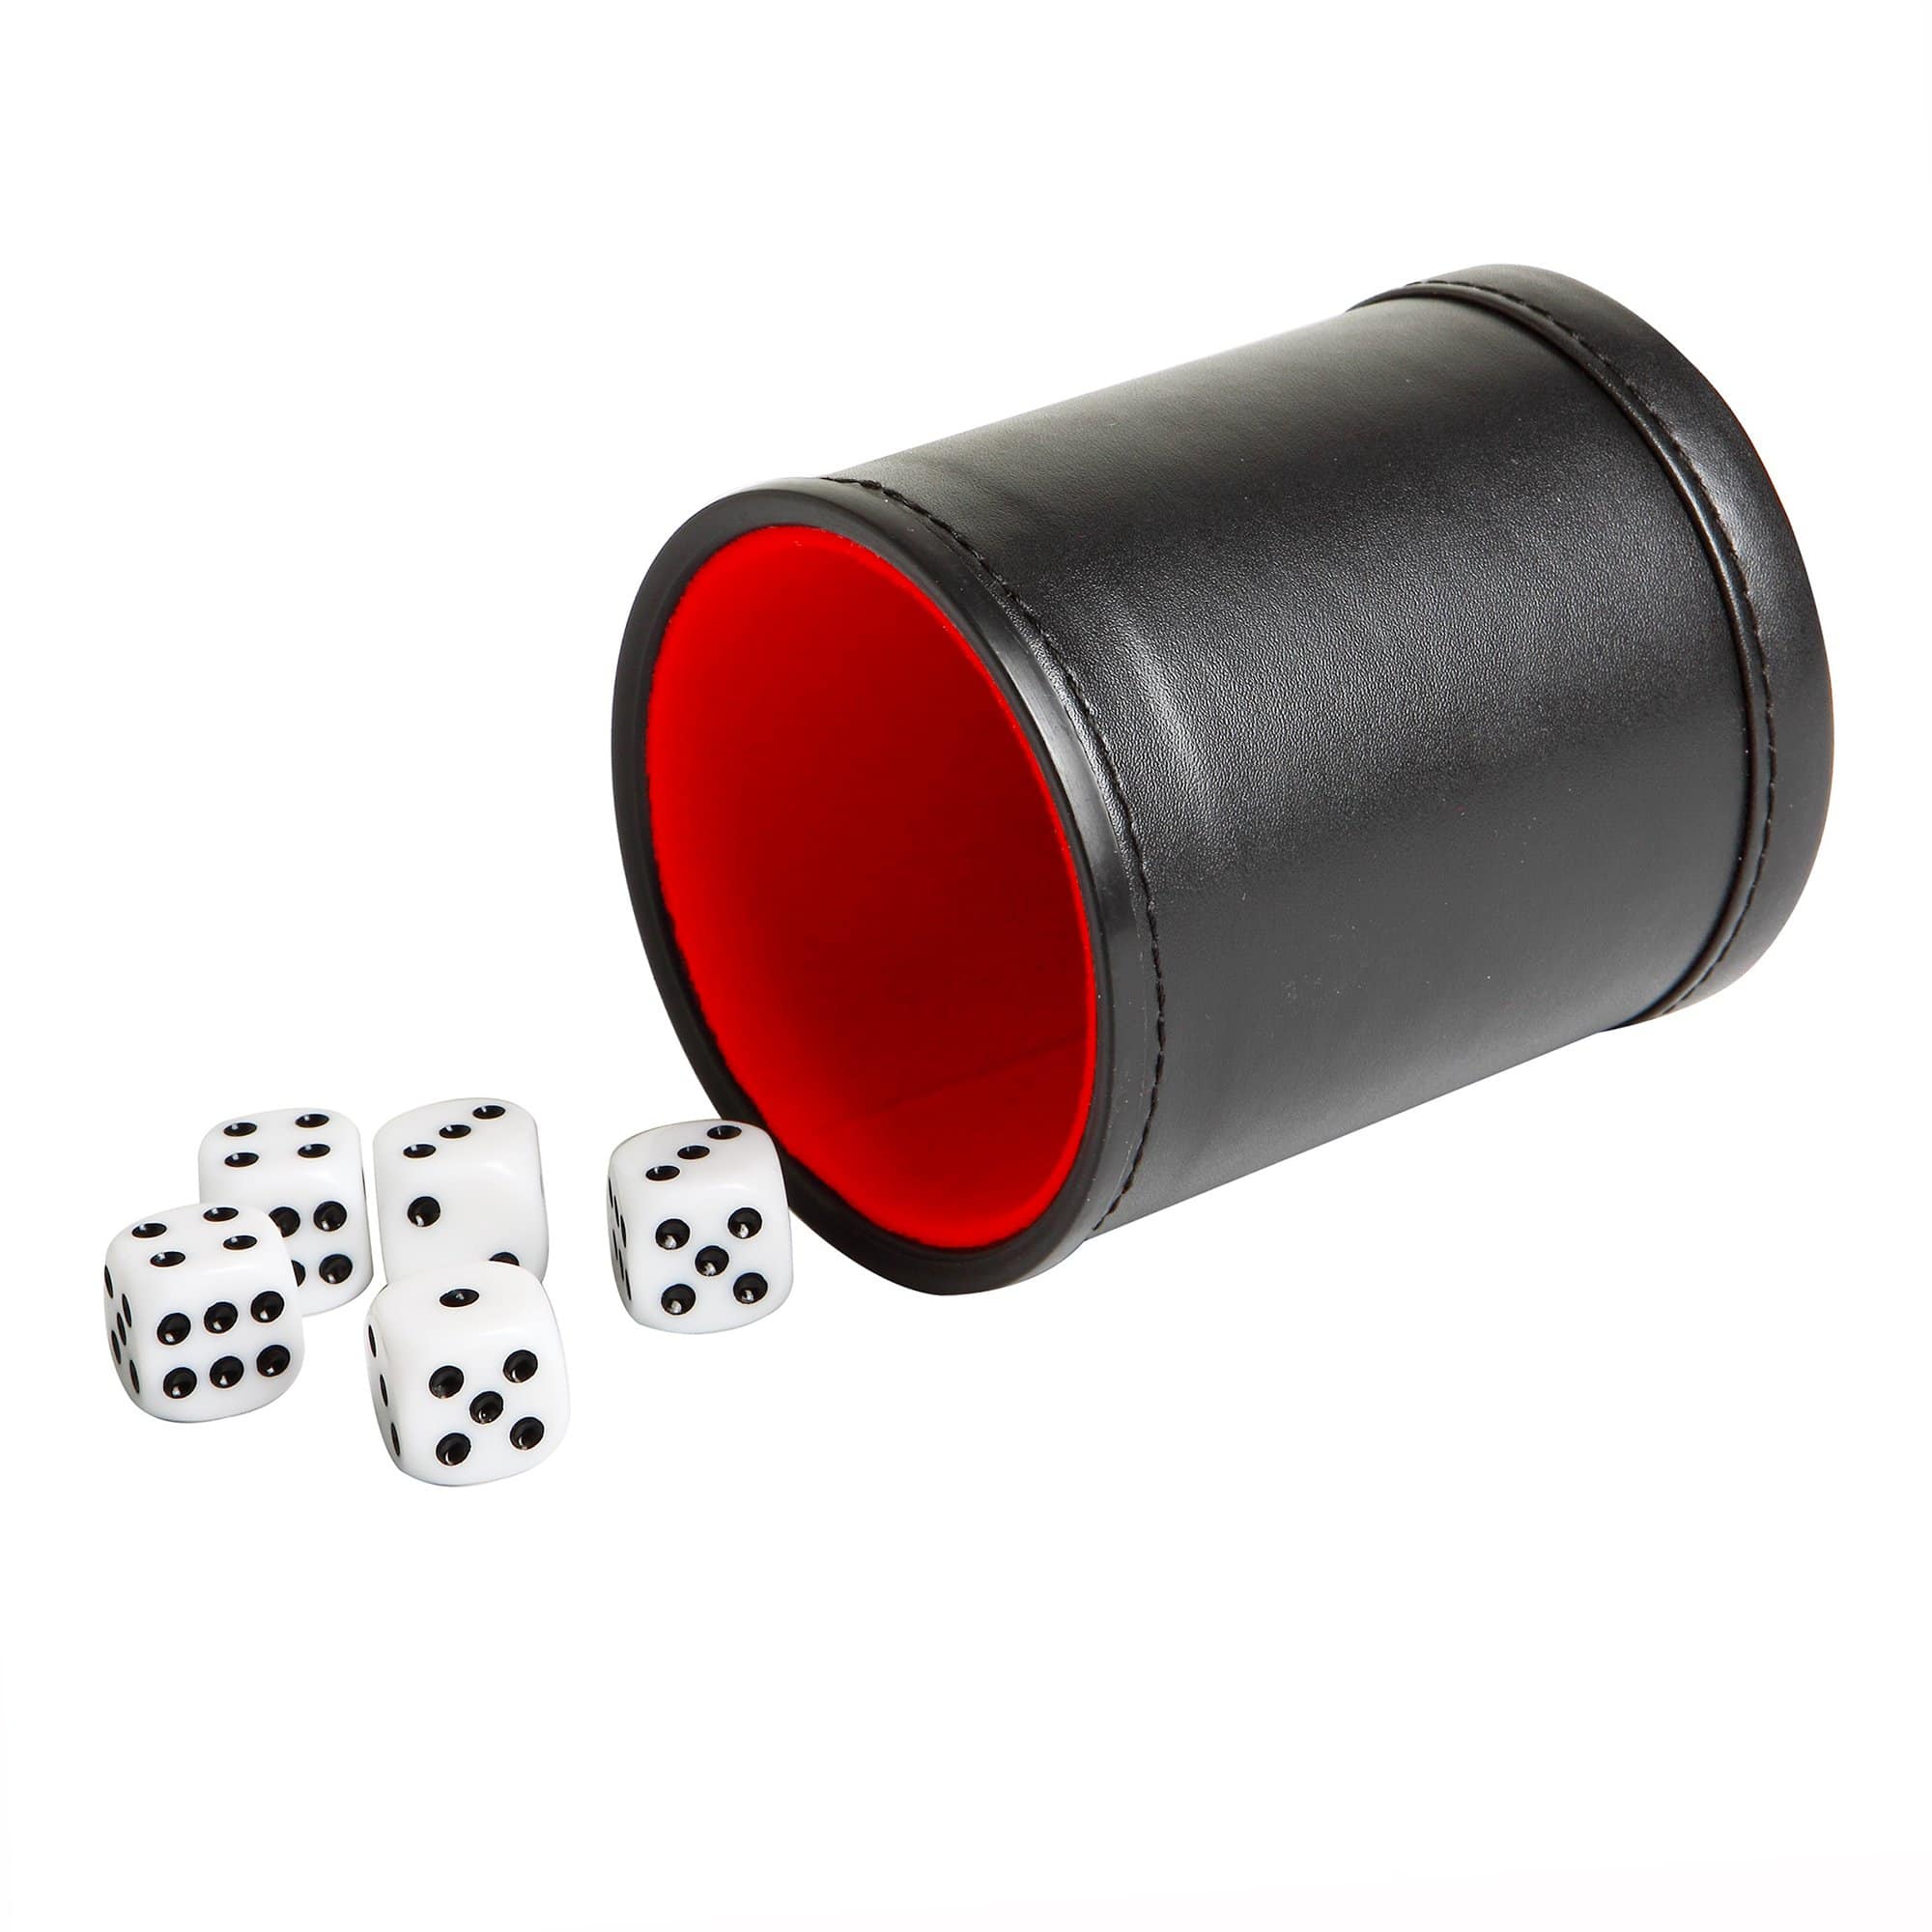 Professional Dice Cup Game with Five Dice Dark Stitched Leather Brand  NEW 